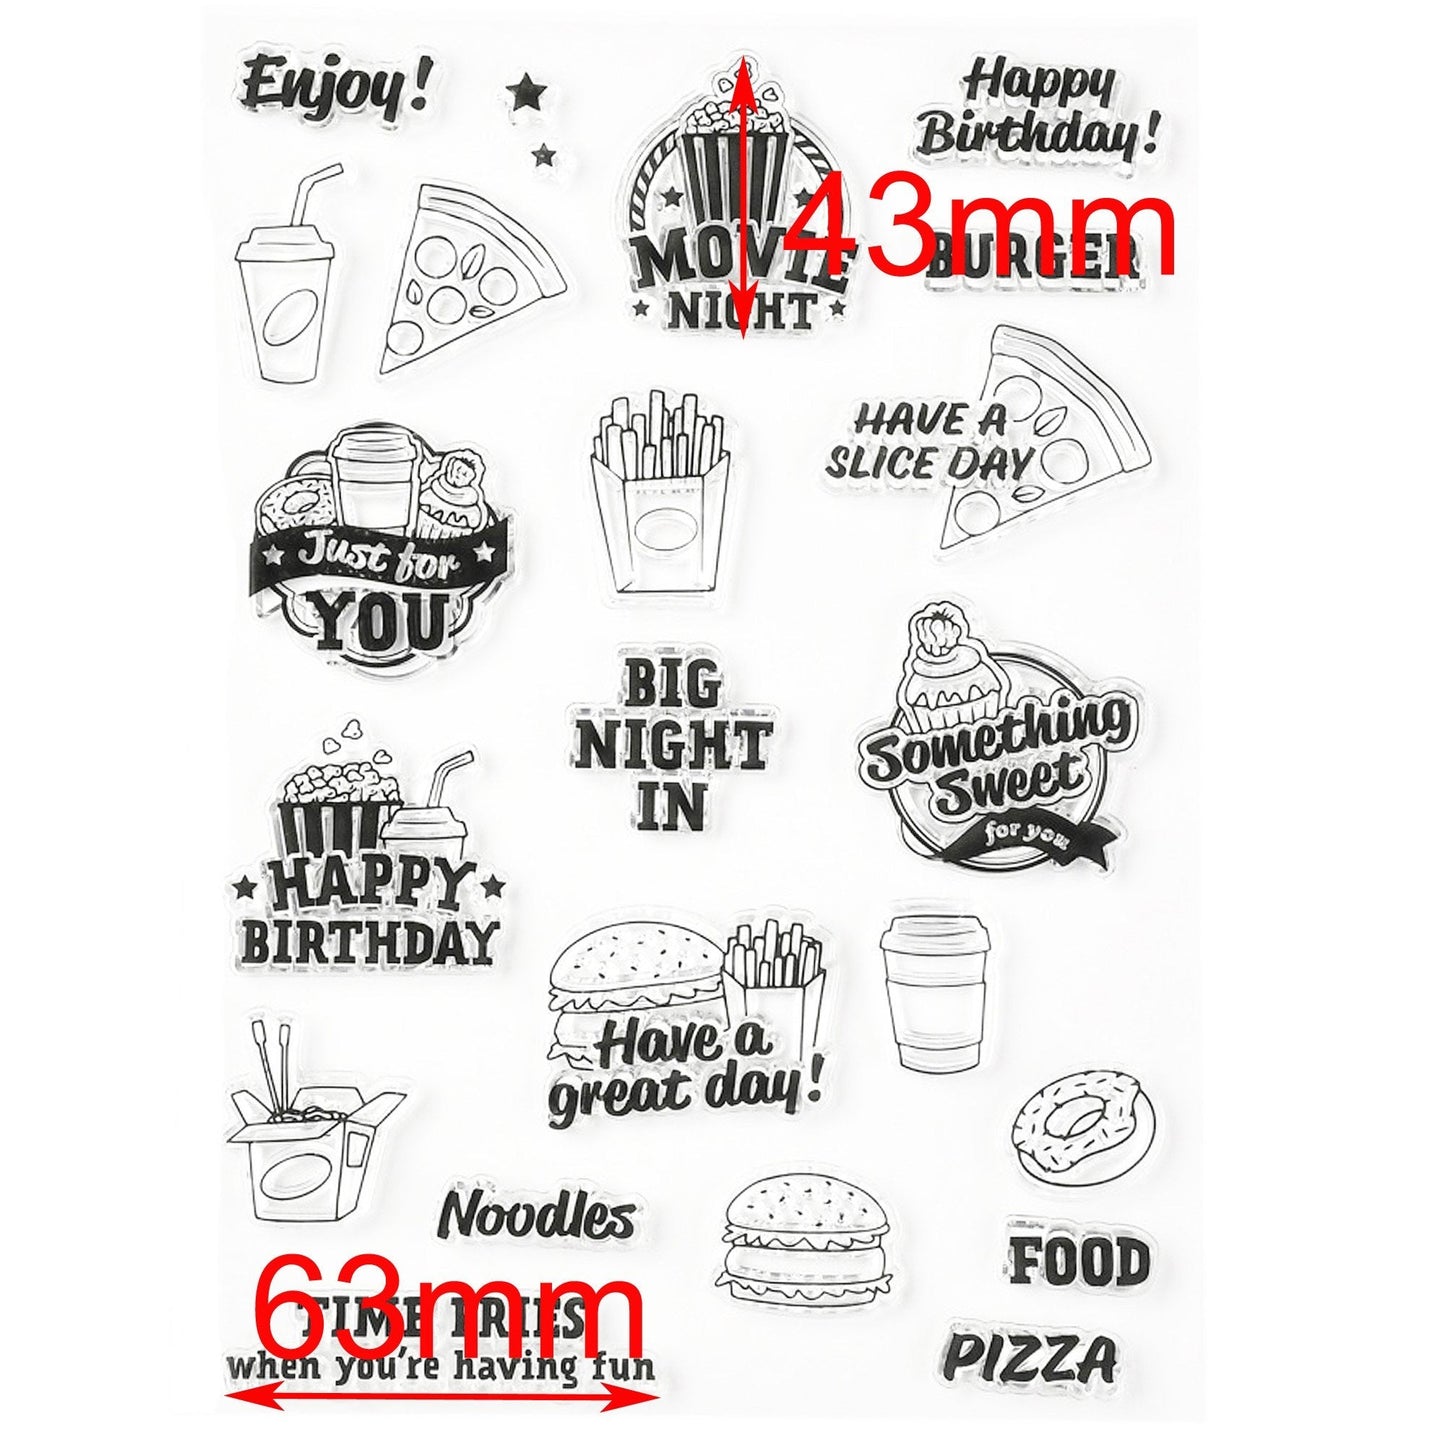 Movie Night Food Birthday Clear Stamp Silicone Rubber Scrapbooking Card Making